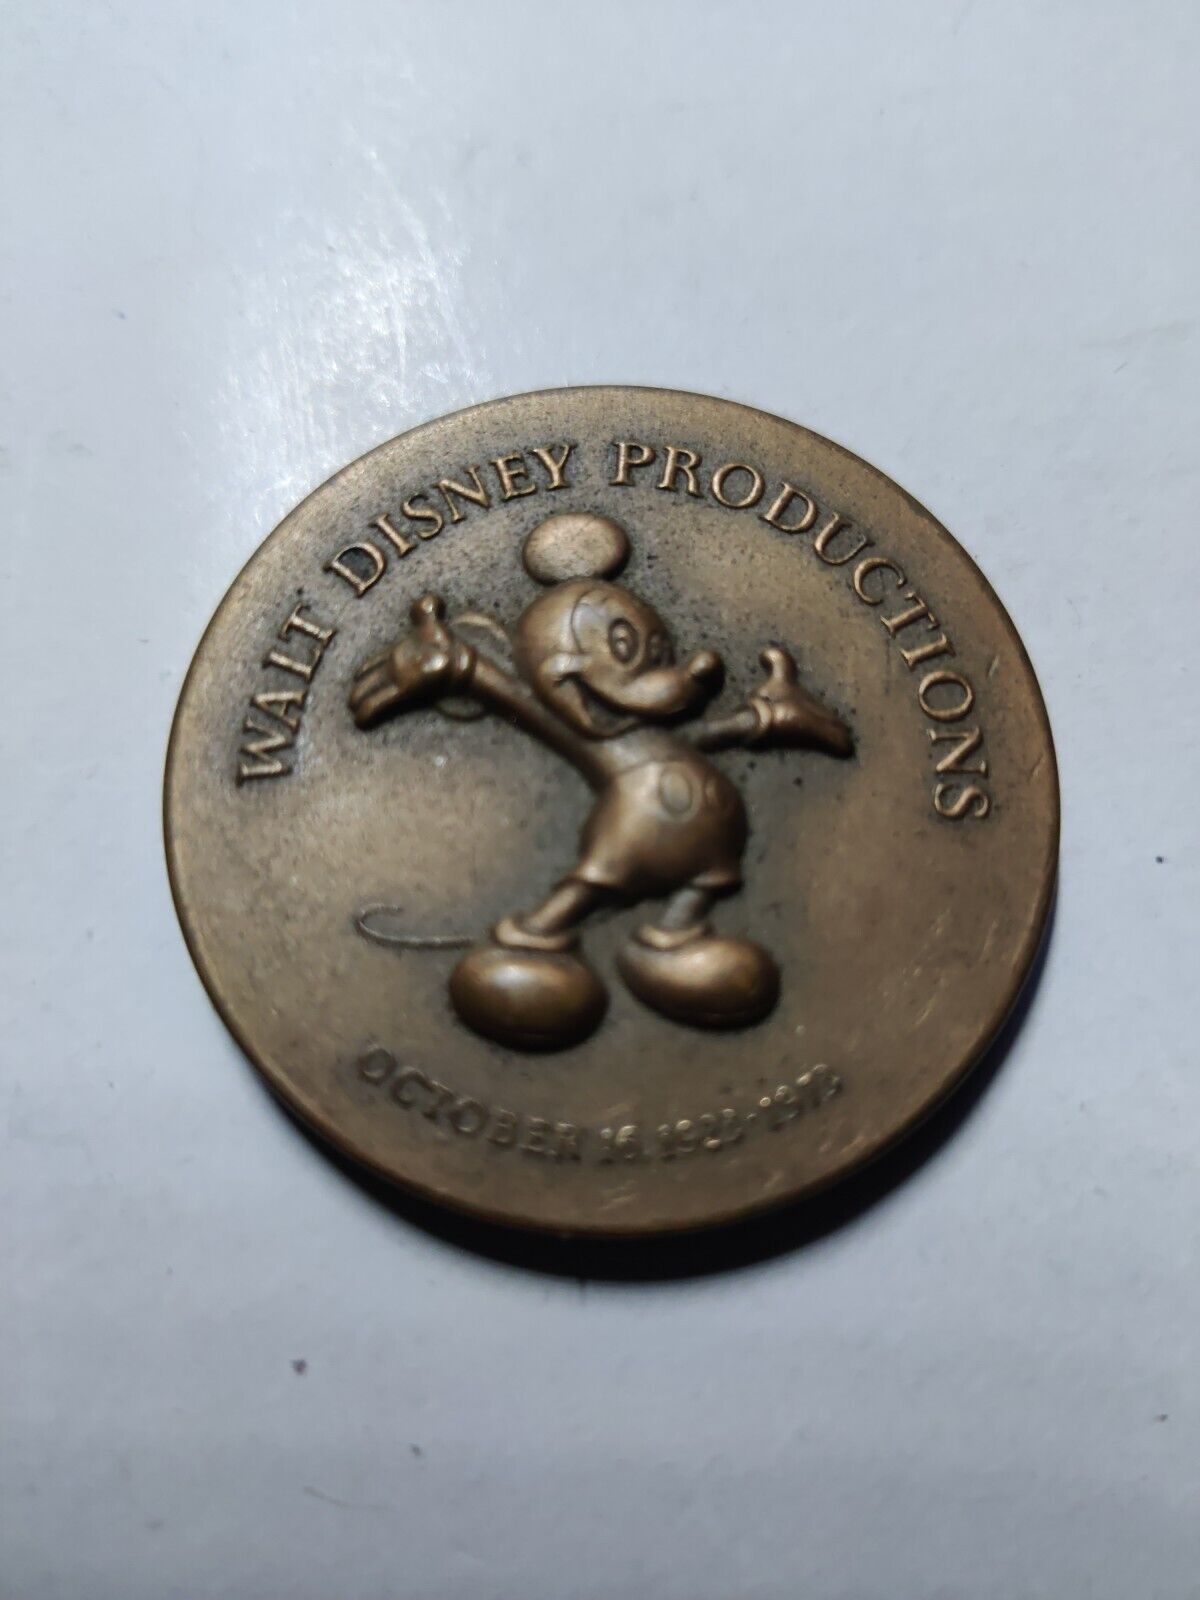 1973 WALT DISNEY PRODUCTIONS 50TH ANNIVERSARY BRONZE COIN MICKEY MOUSE MEDALLION